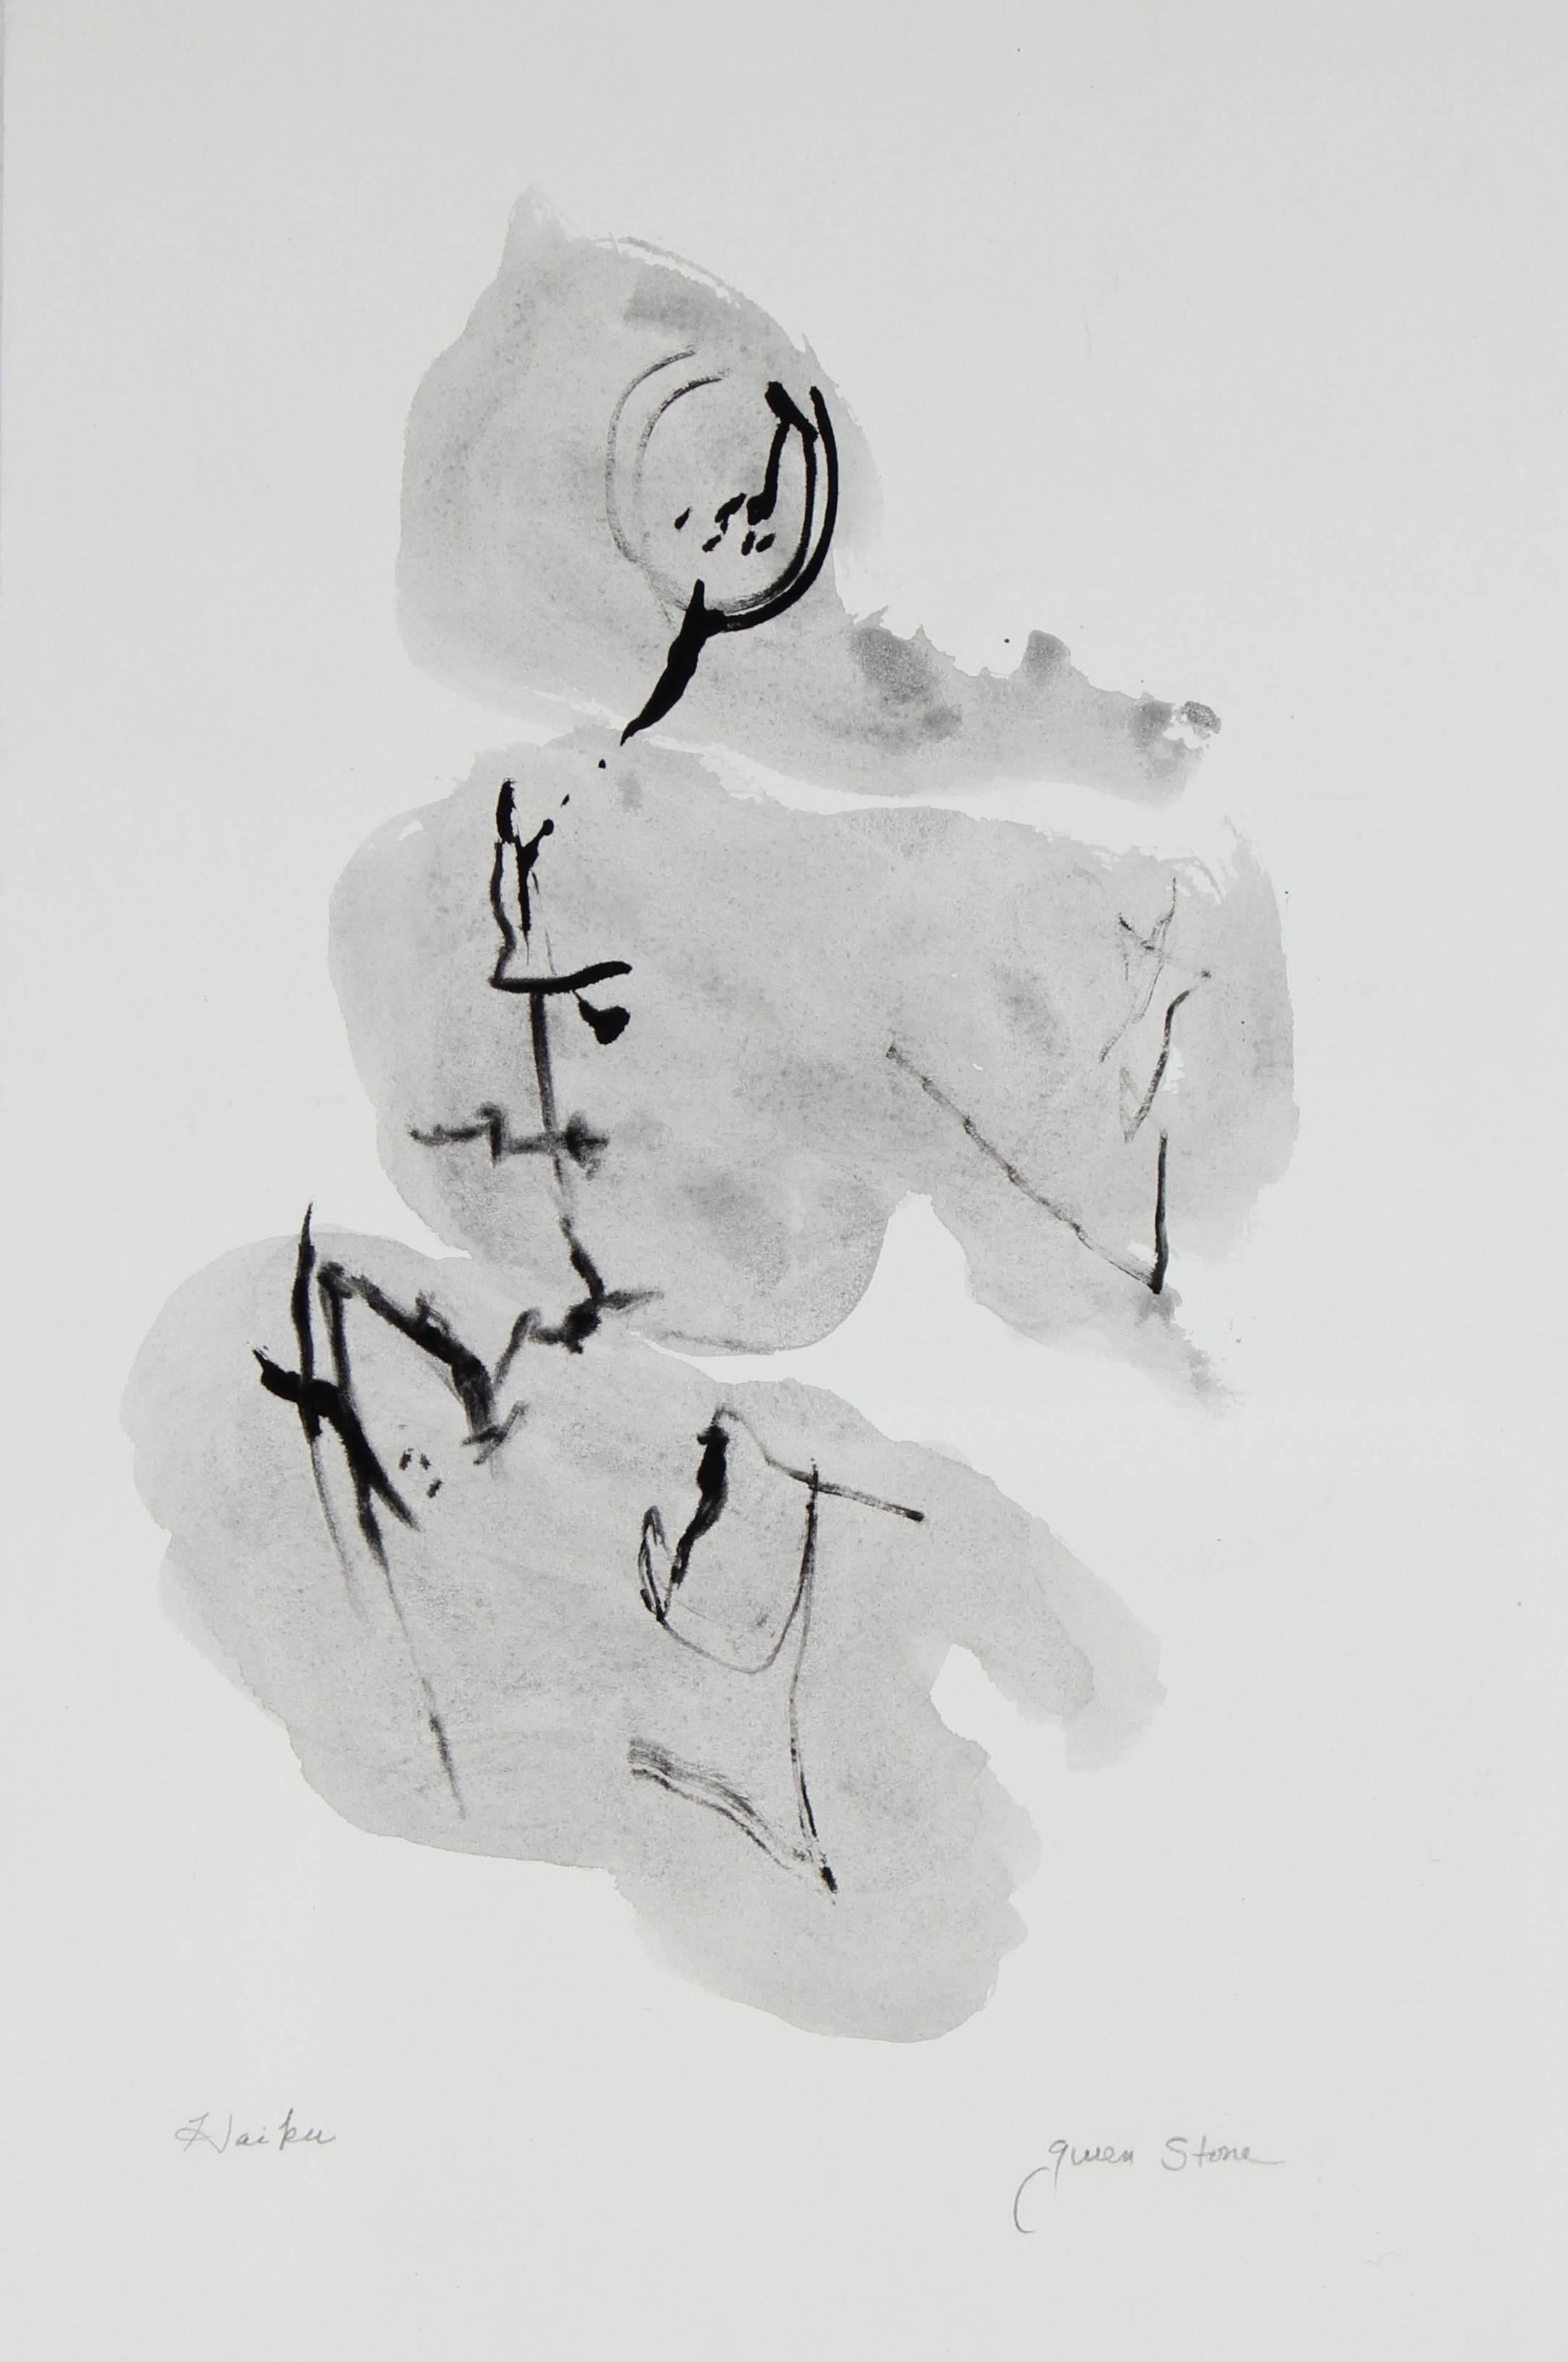 Gwen Stone Abstract Drawing - "Haiku" Modernist Abstract